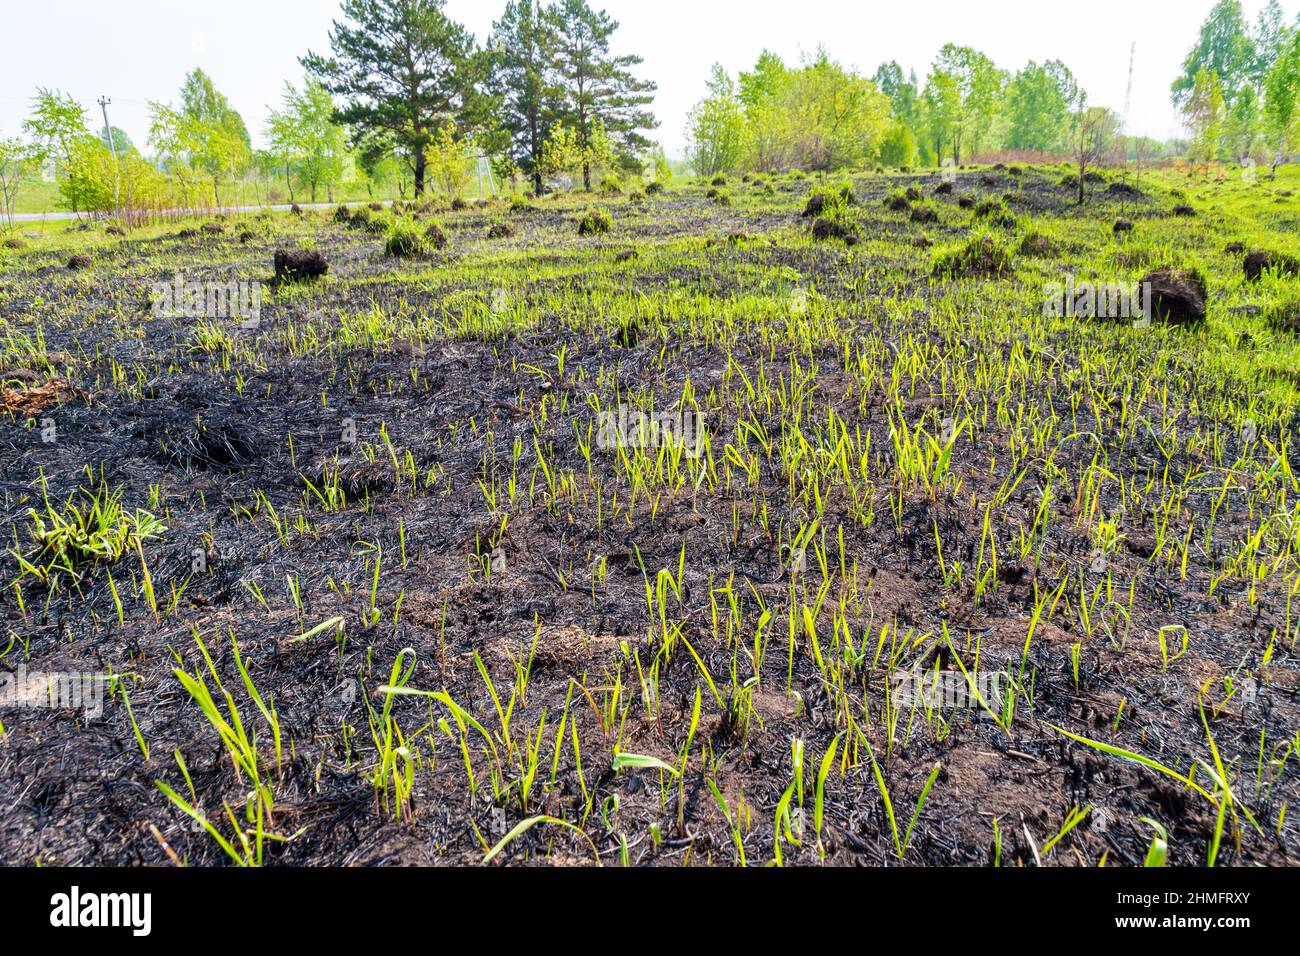 regenerating vegetation cover after a fire that destroyed small vegetation and insects and microorganisms in the upper soil layer, selective focus Stock Photo